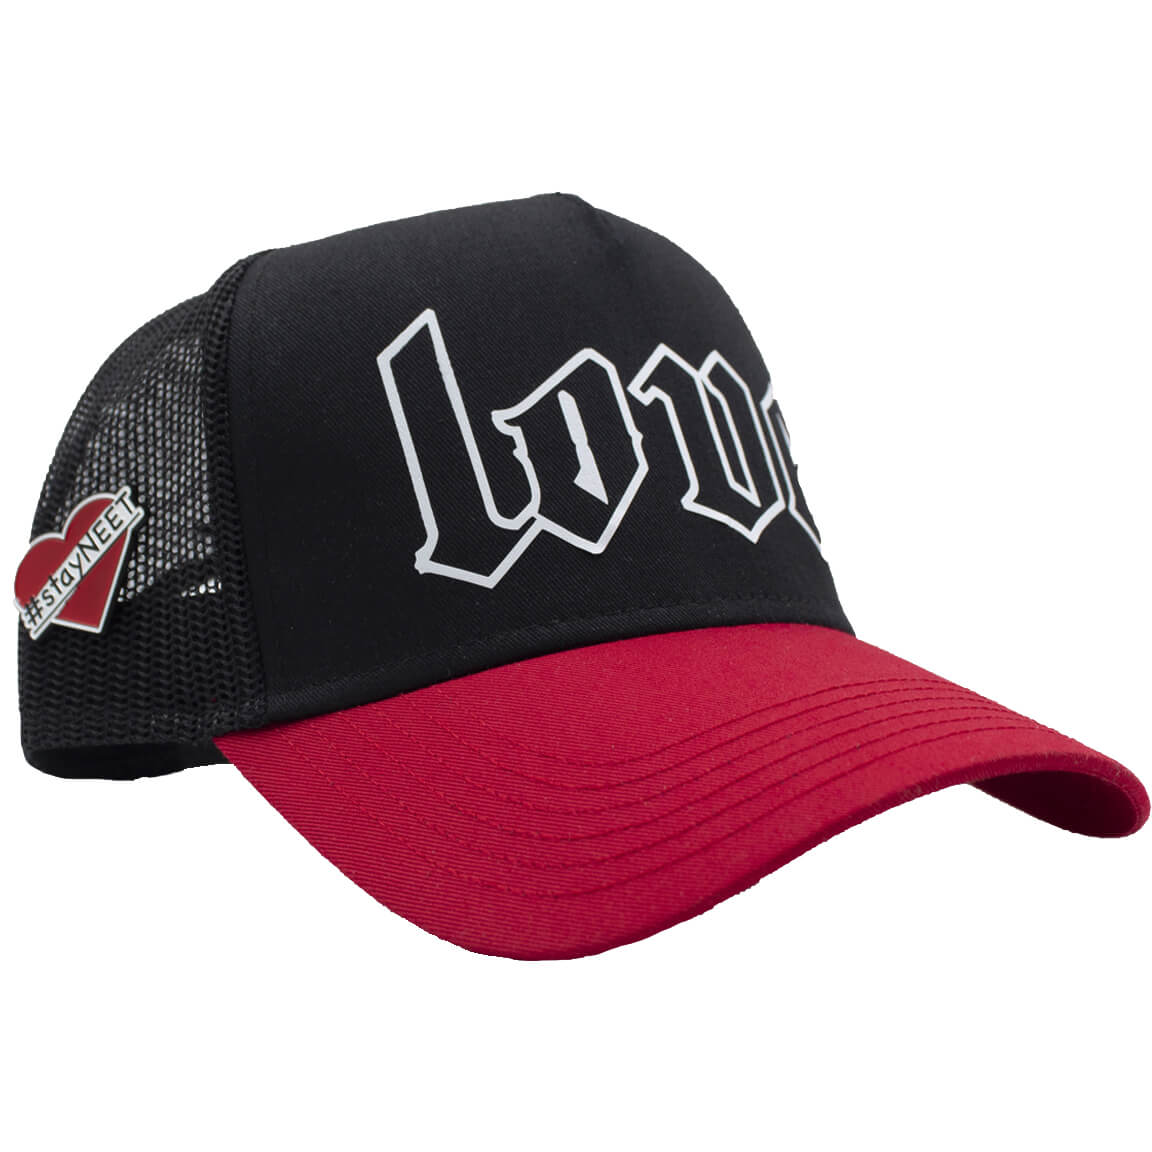 Best Trucker Hats For Men At Affordable Price